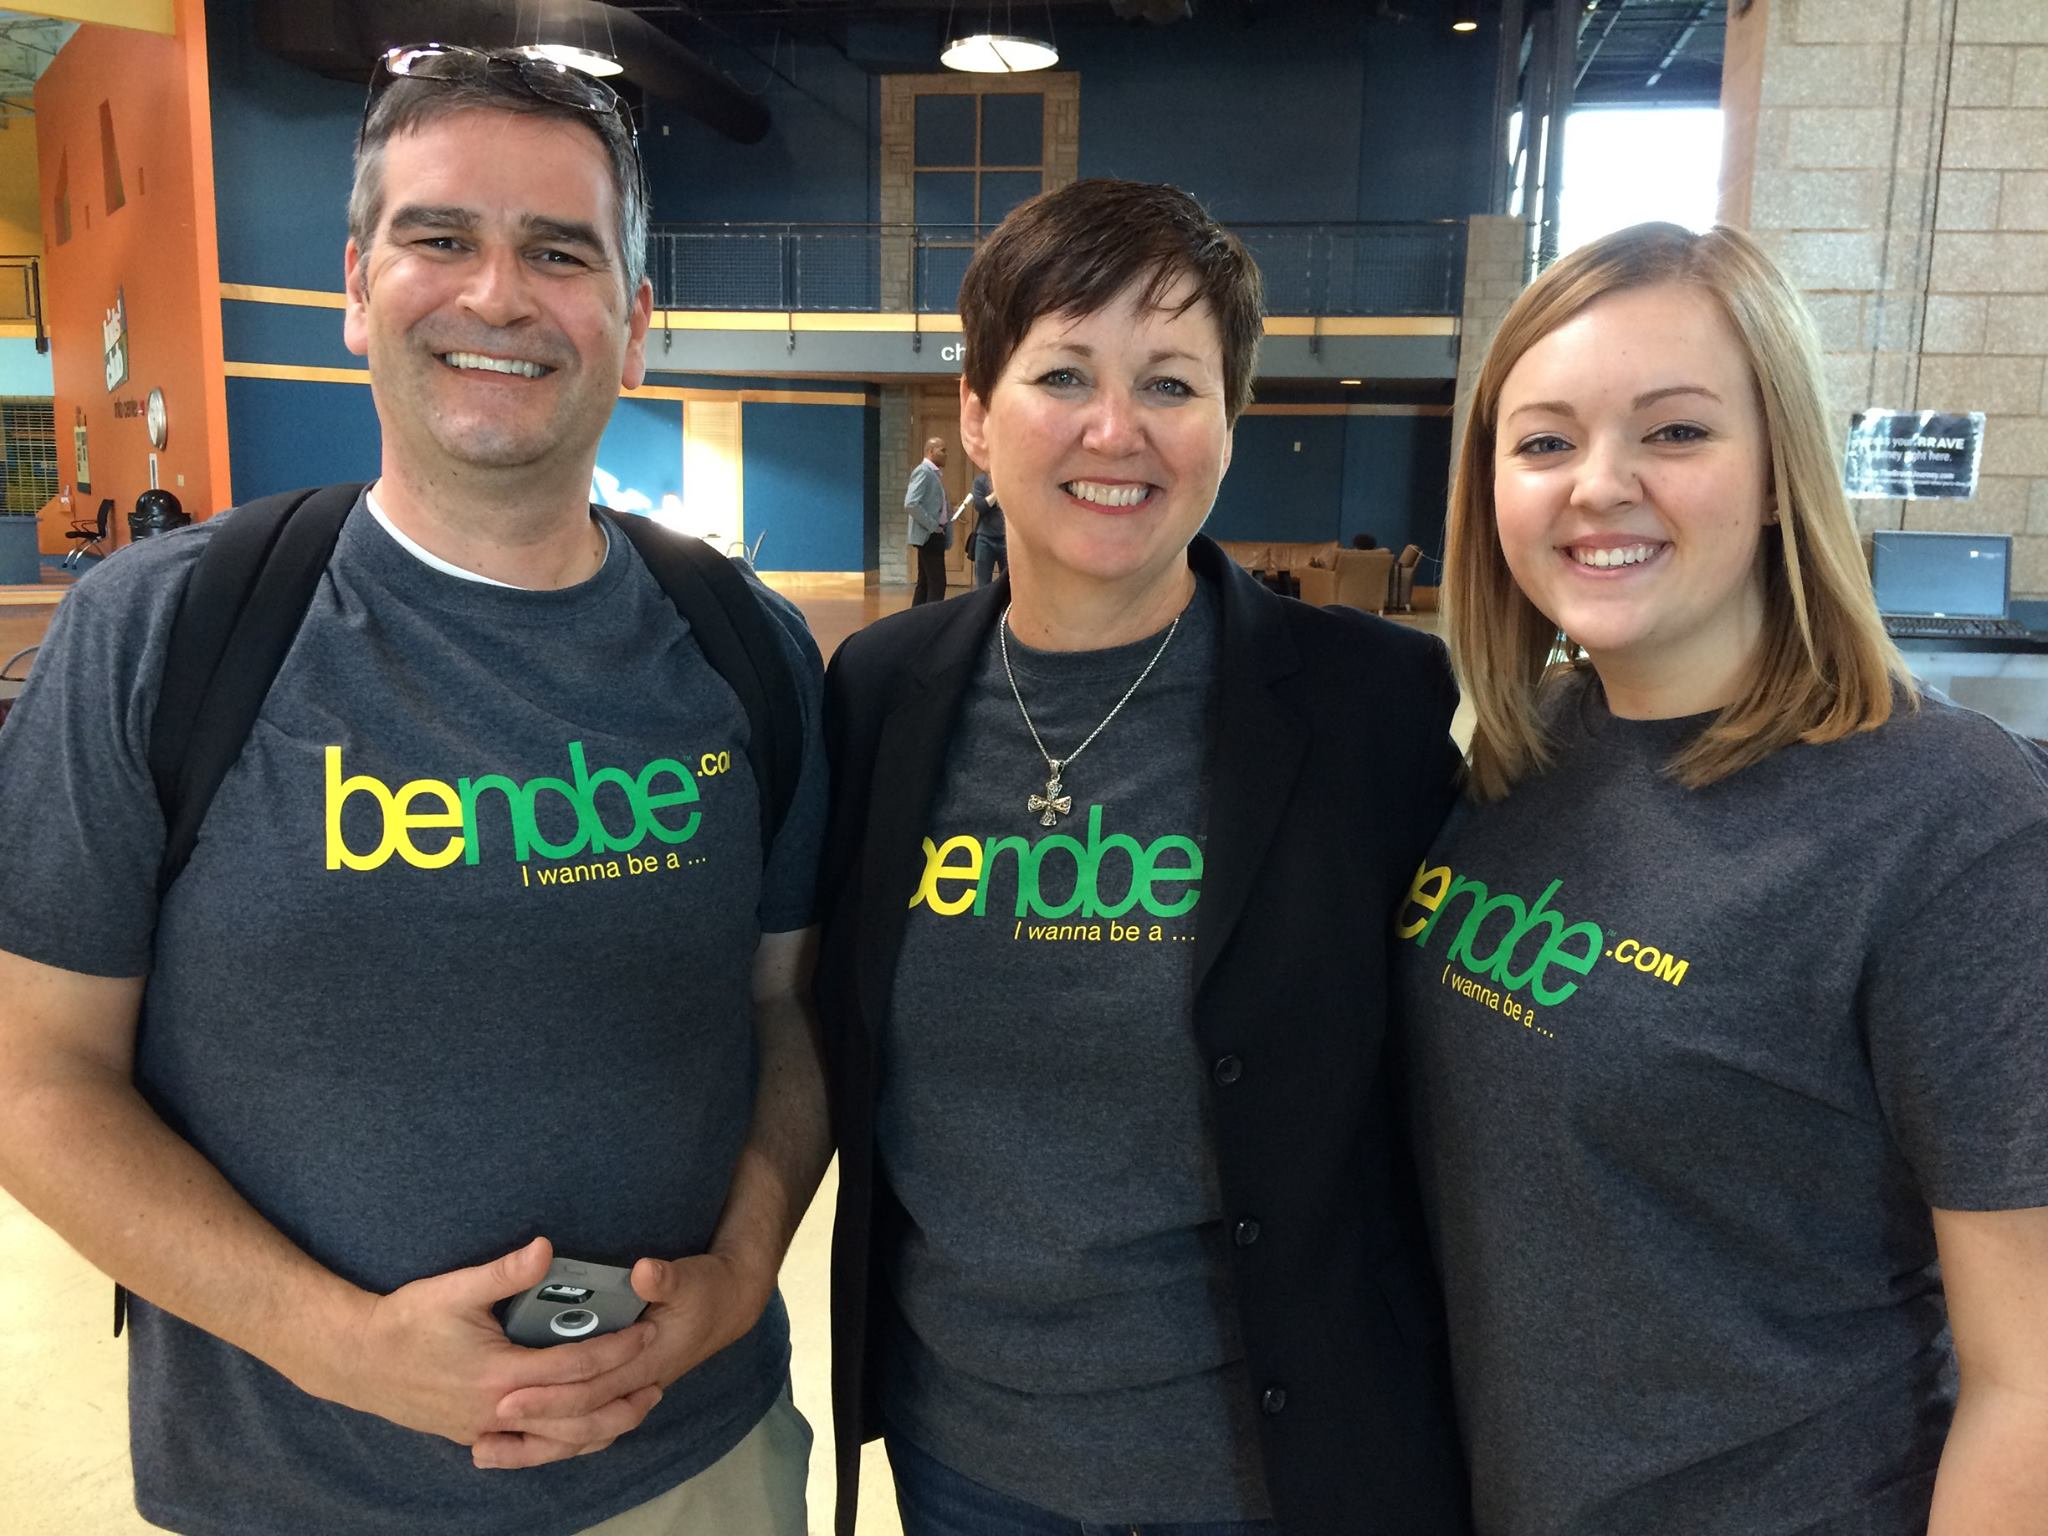 benobe, LLC - From left to right: Jeff, Julie, and Kelsey